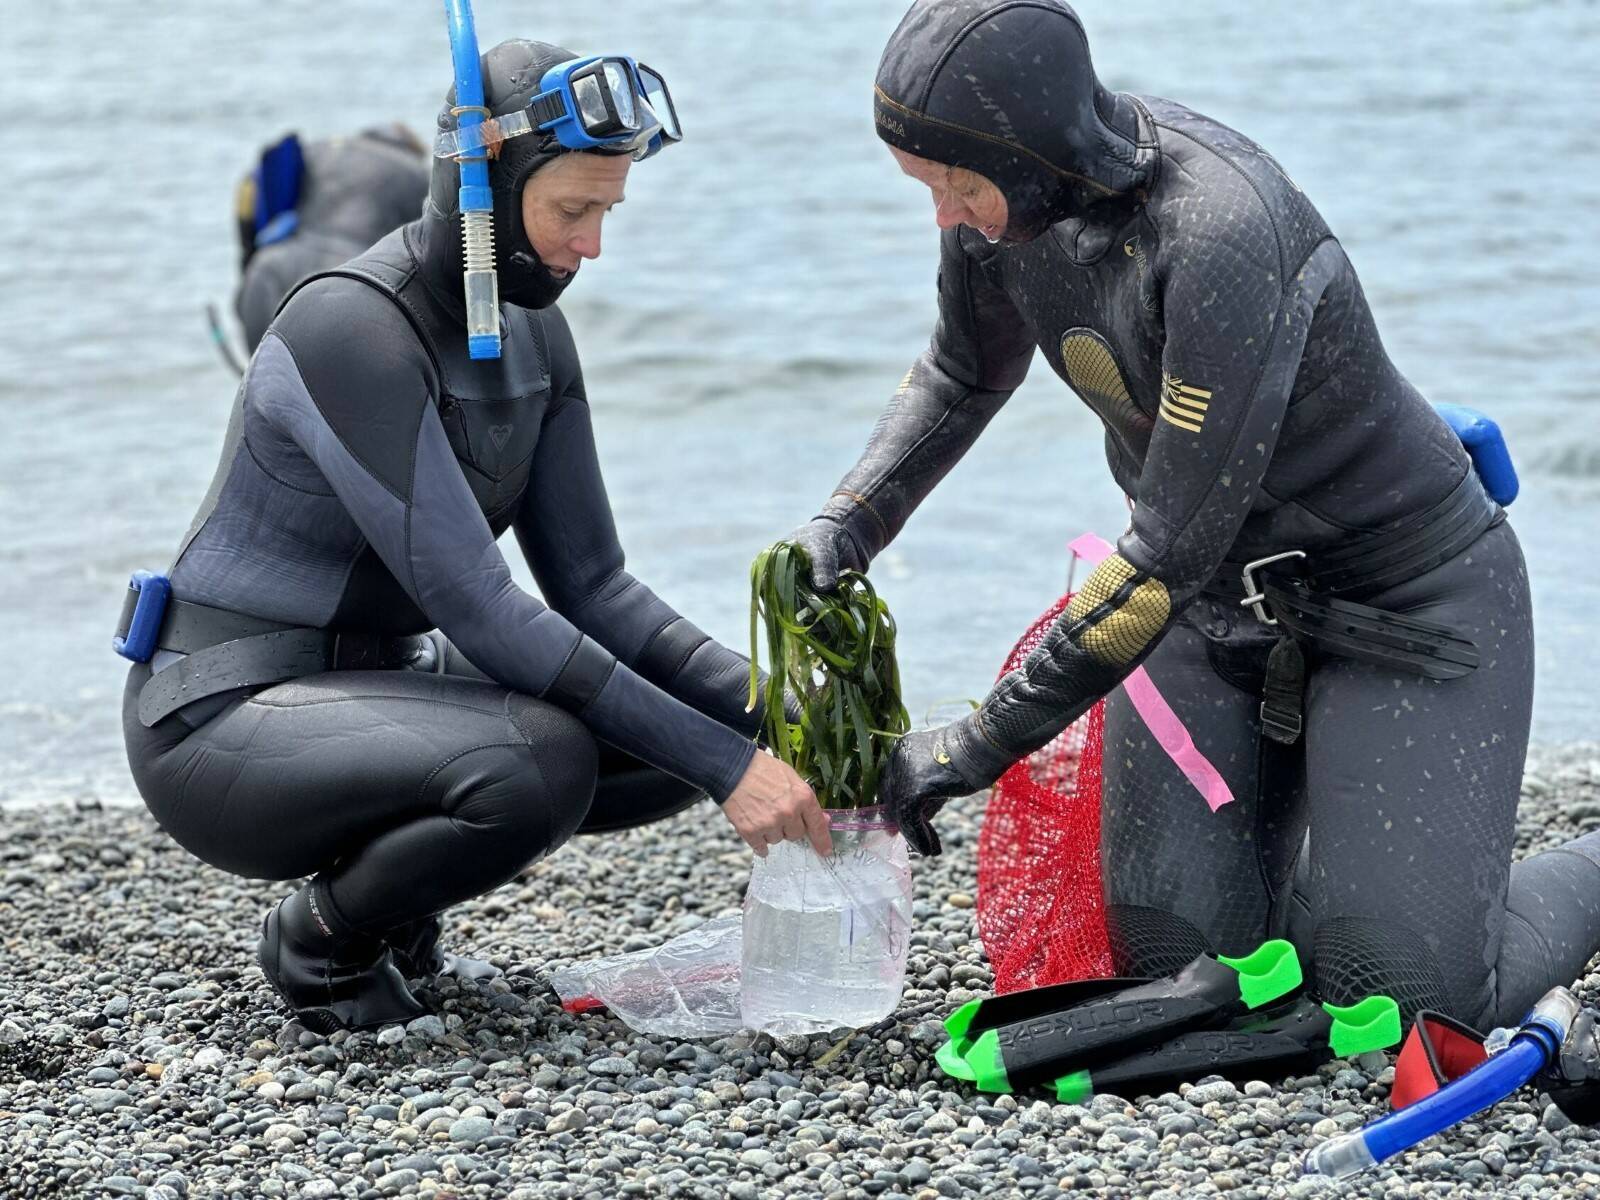 Conributed photo
Friends of the San Juans’ Science Director Tina Whitman and volunteer Nickie Davis collecting samples for wasting disease analysis.